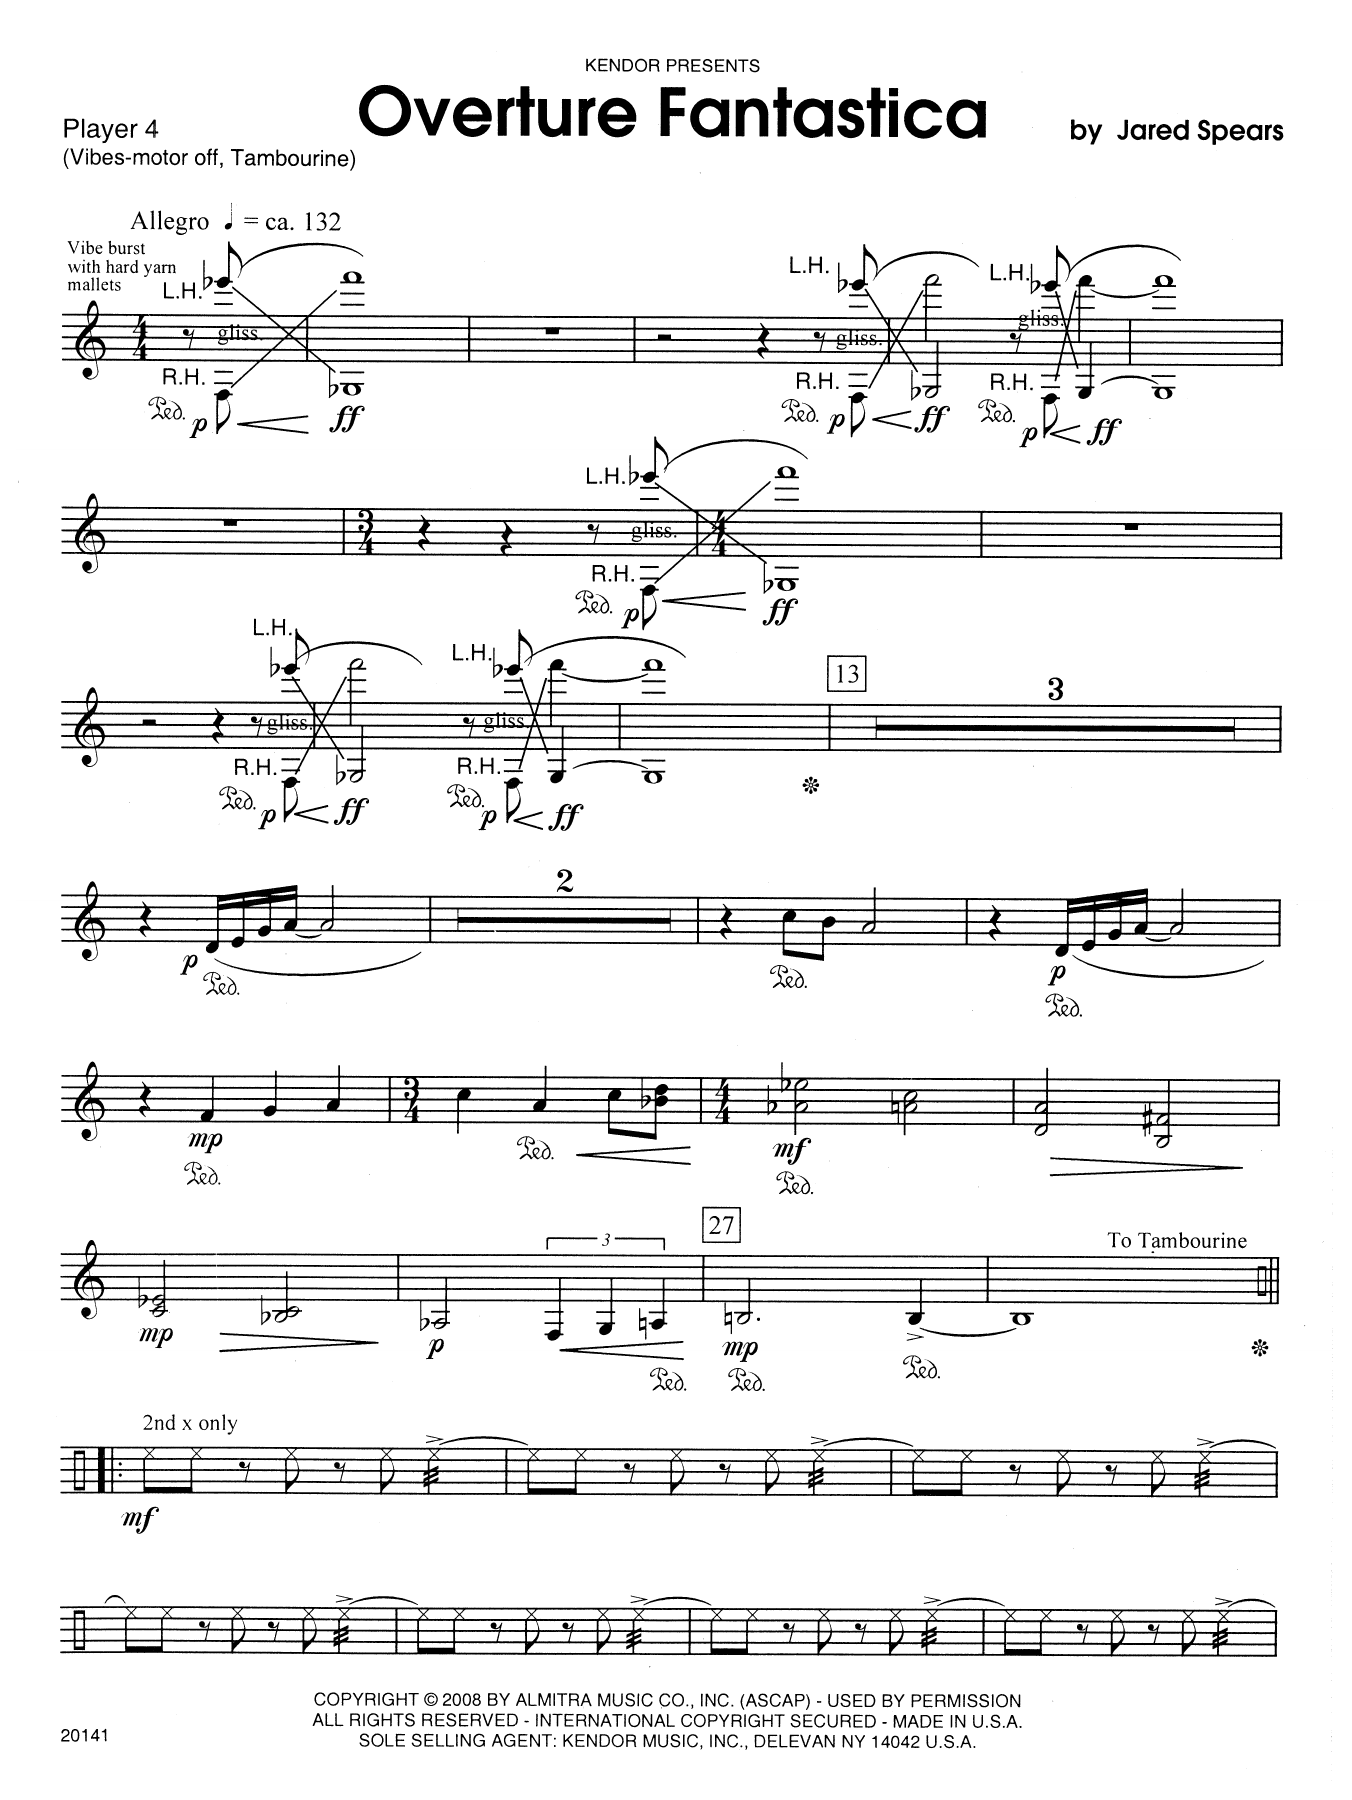 Download Jared Spears Overture Fantastica - Percussion 4 Sheet Music